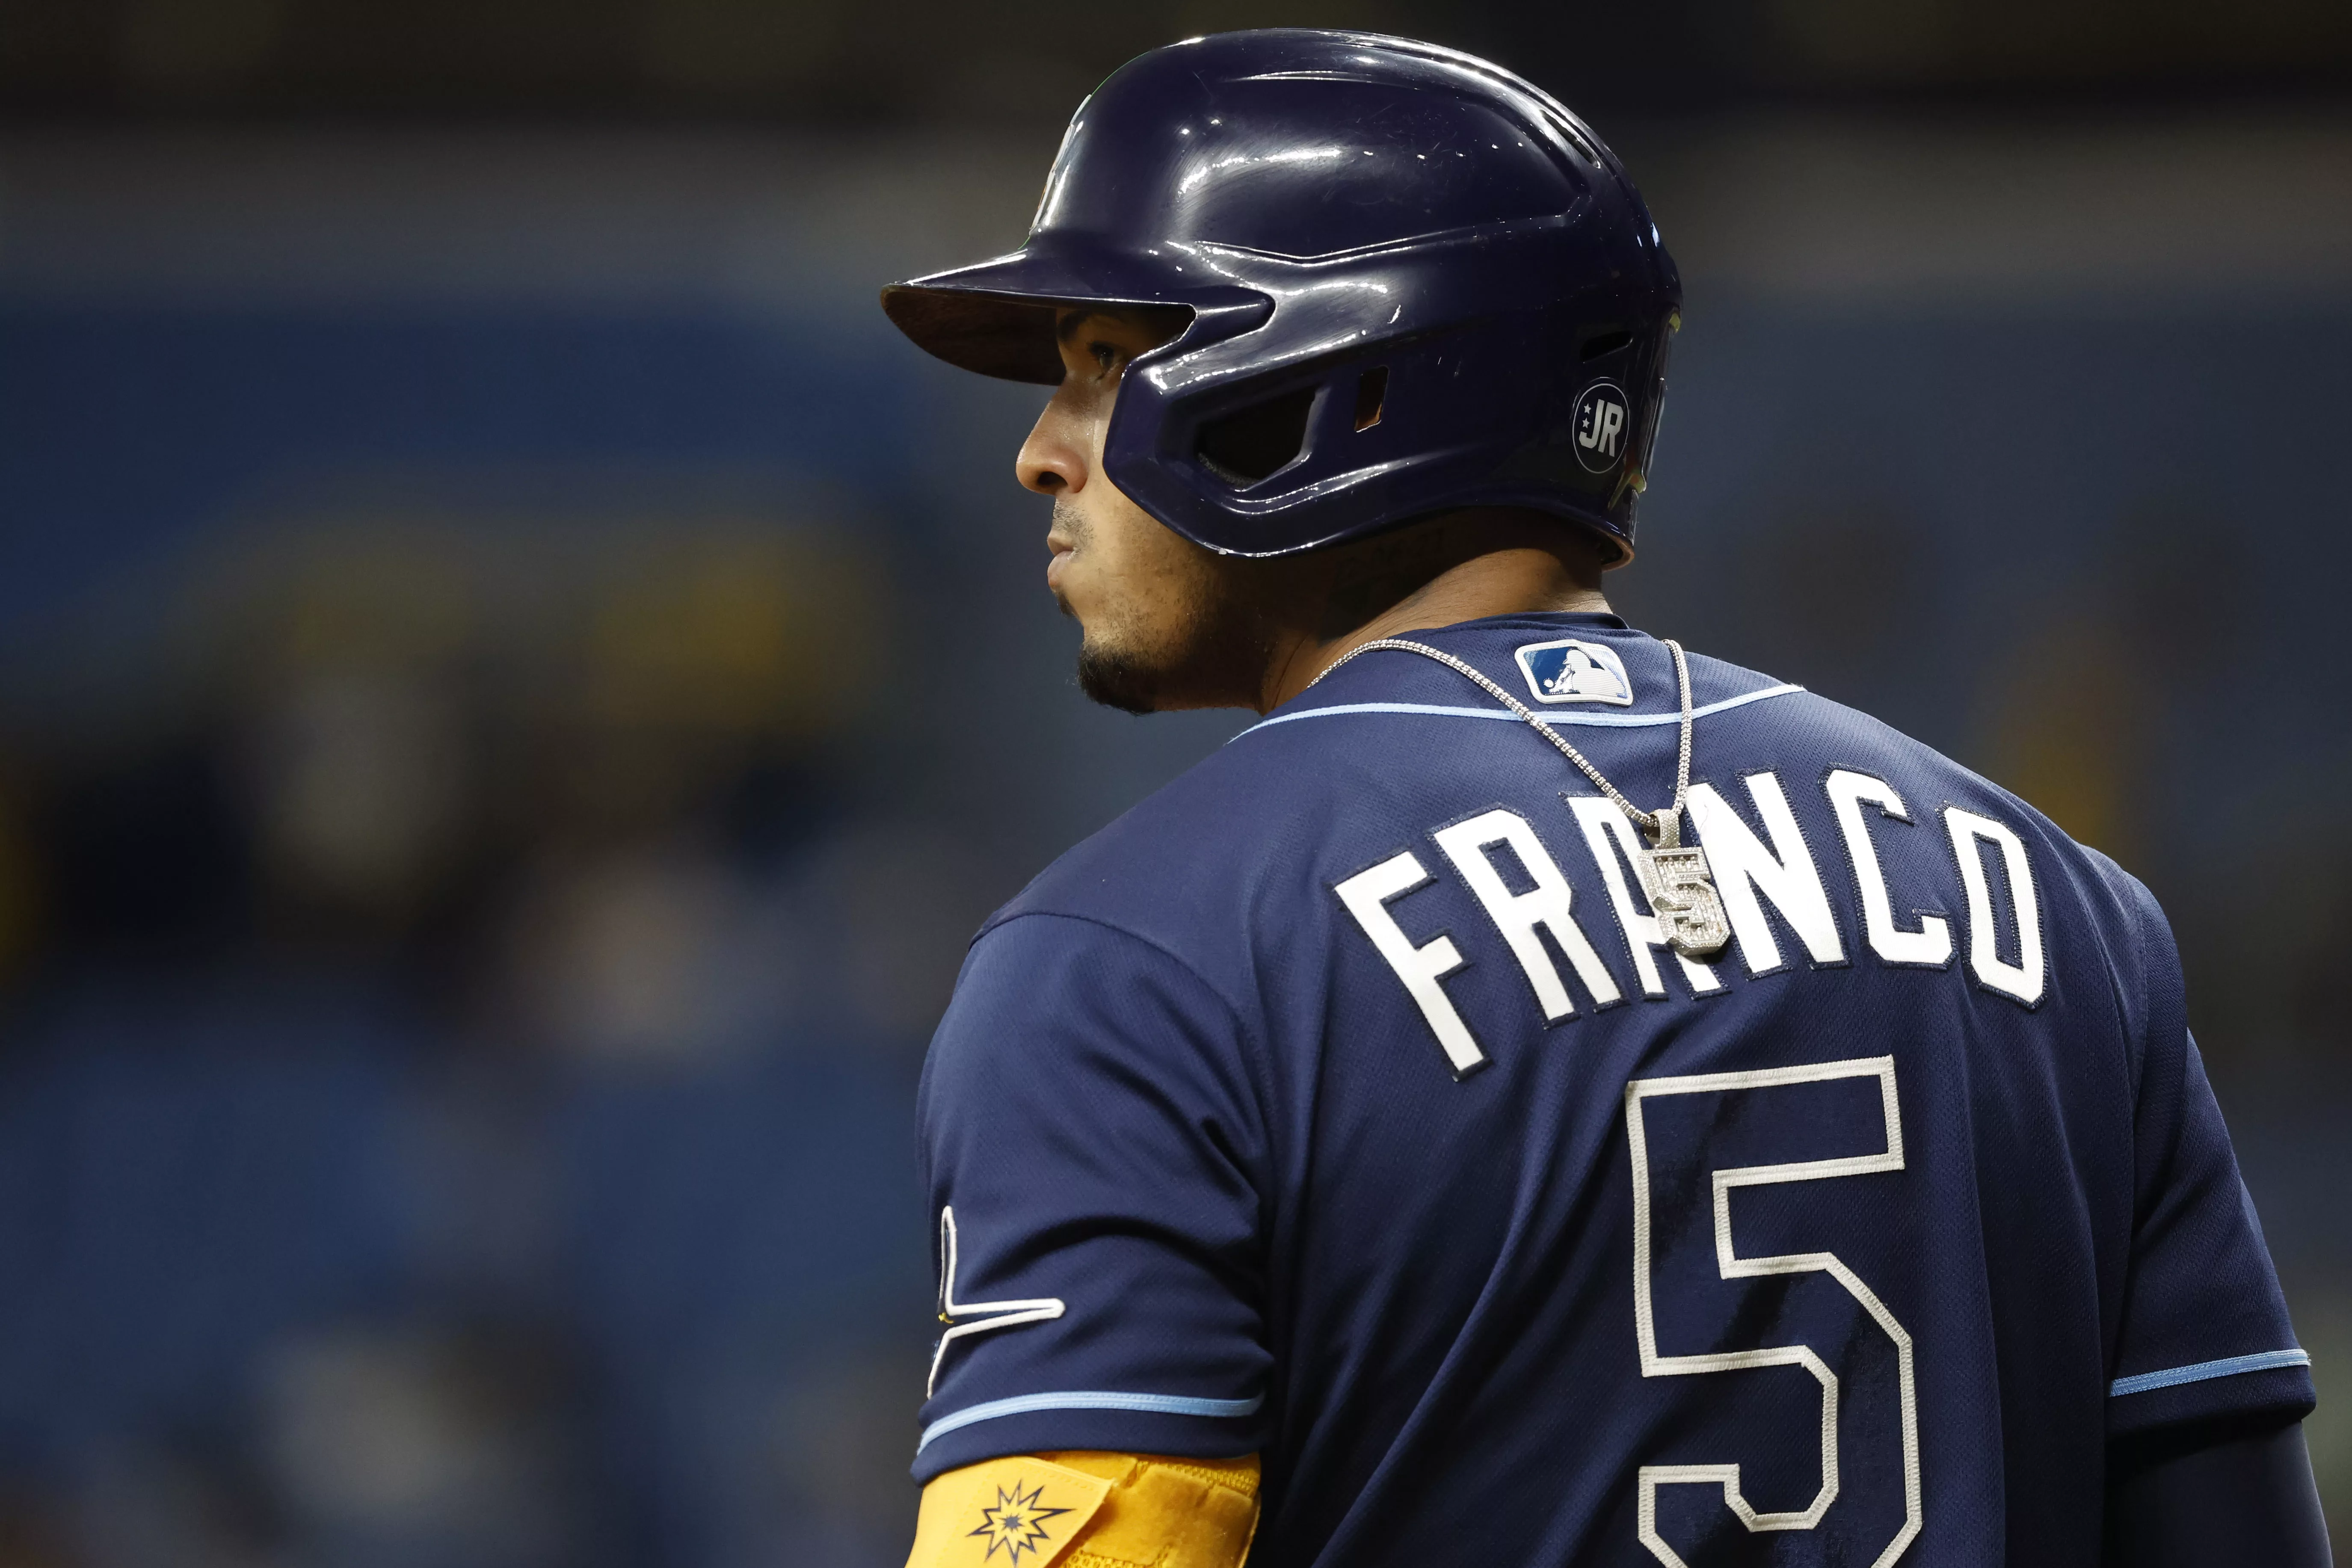 Wander Franco Is 'Very Unlikely' to Play in MLB Again